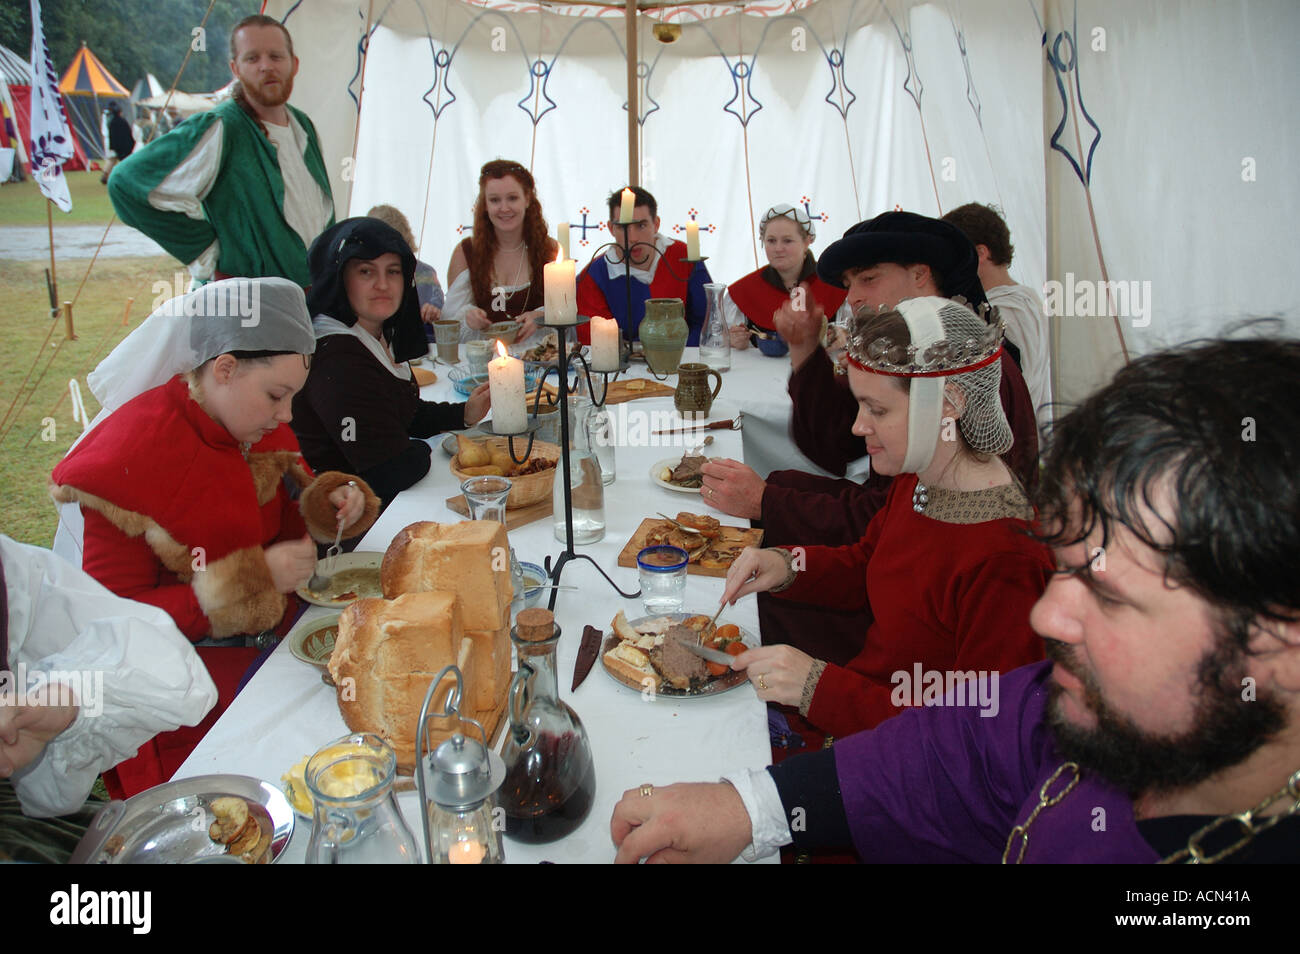 Formal meal in Medieval feasting in tent camp encampment dsc 1395 Stock Photo